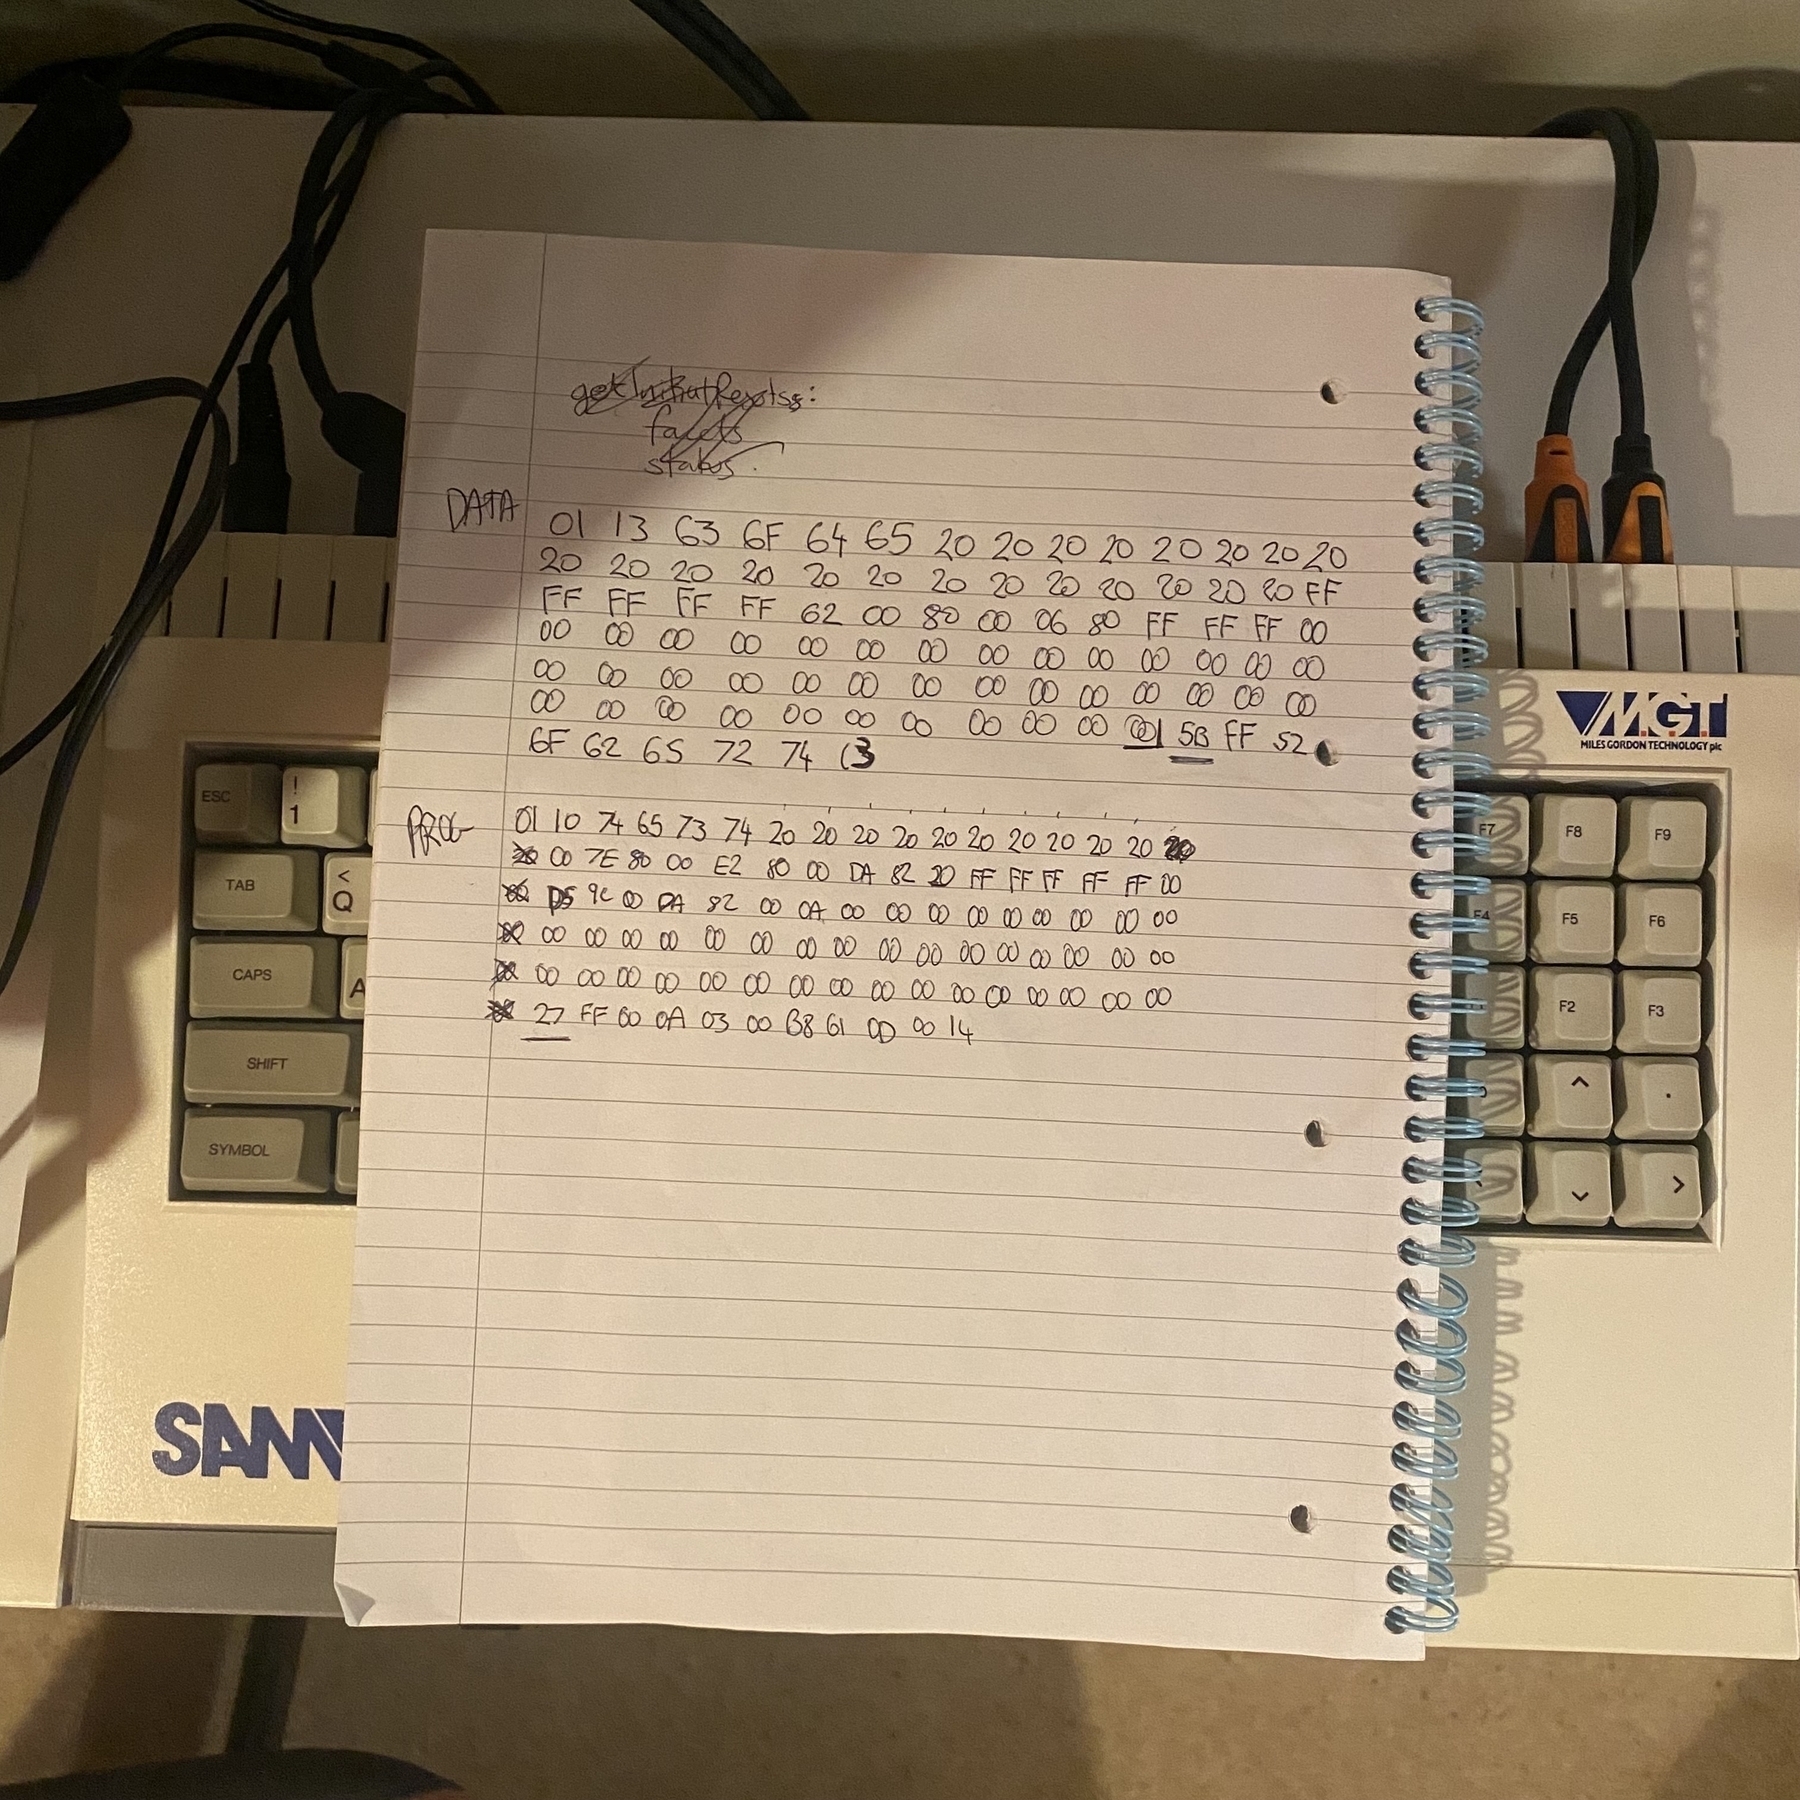 Handwritten hexadecimal numbers on a lined notepad. The notepad is on top of SAM Coupé